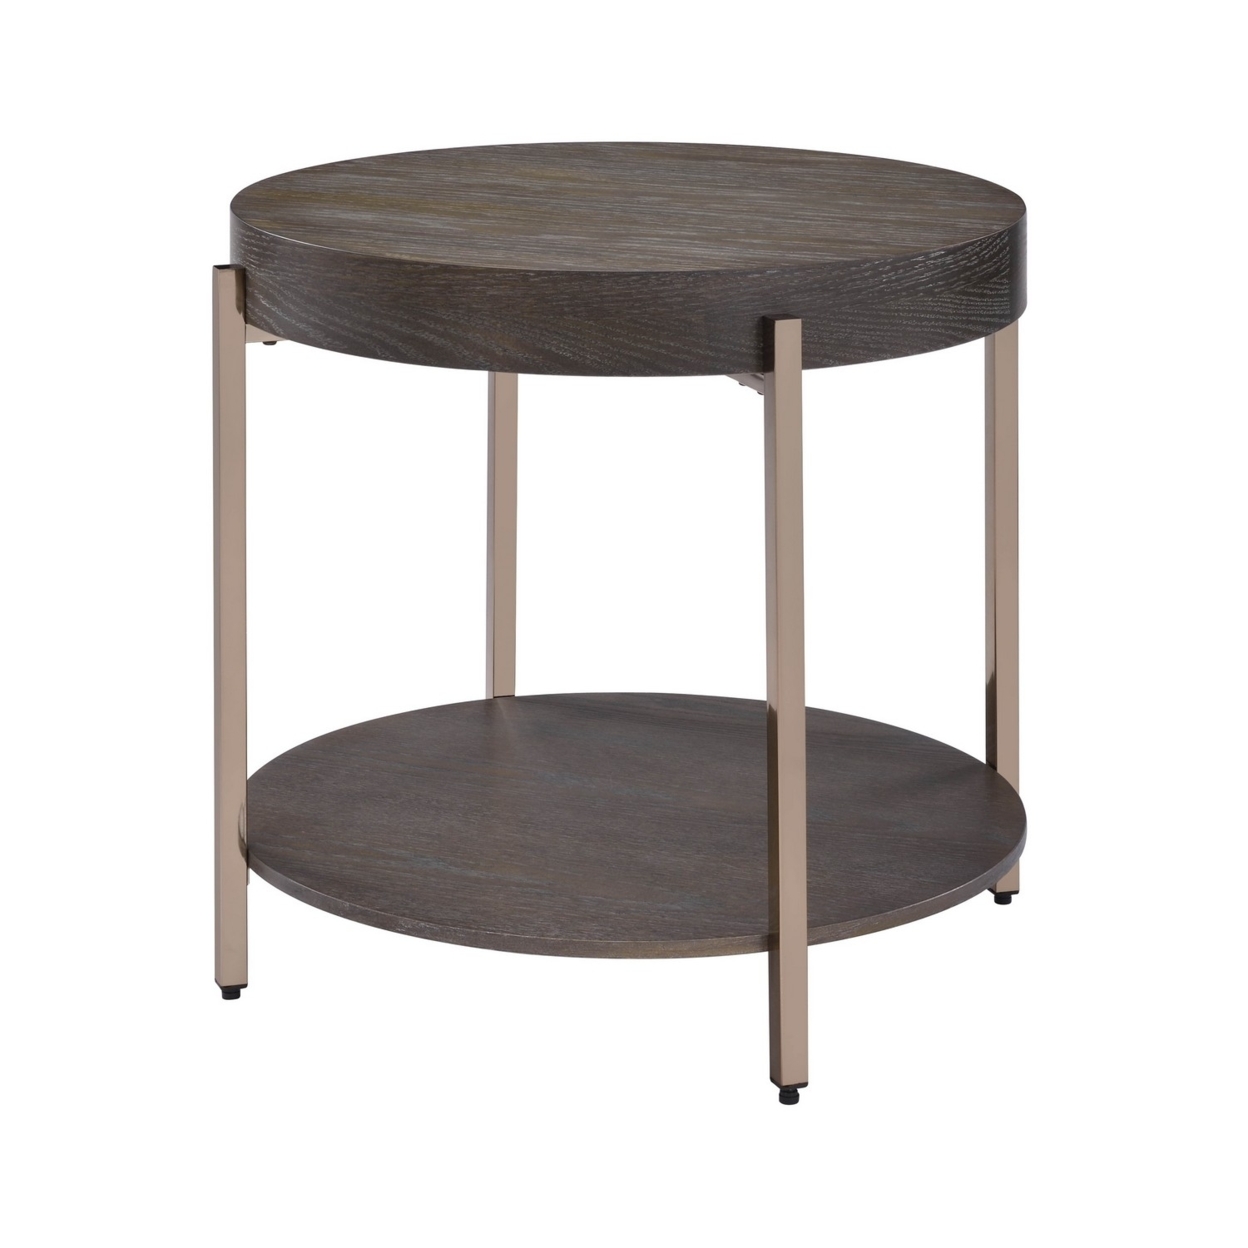 Wood And Metal End Table With 1 Shelf, Brown And Champagne- Saltoro Sherpi